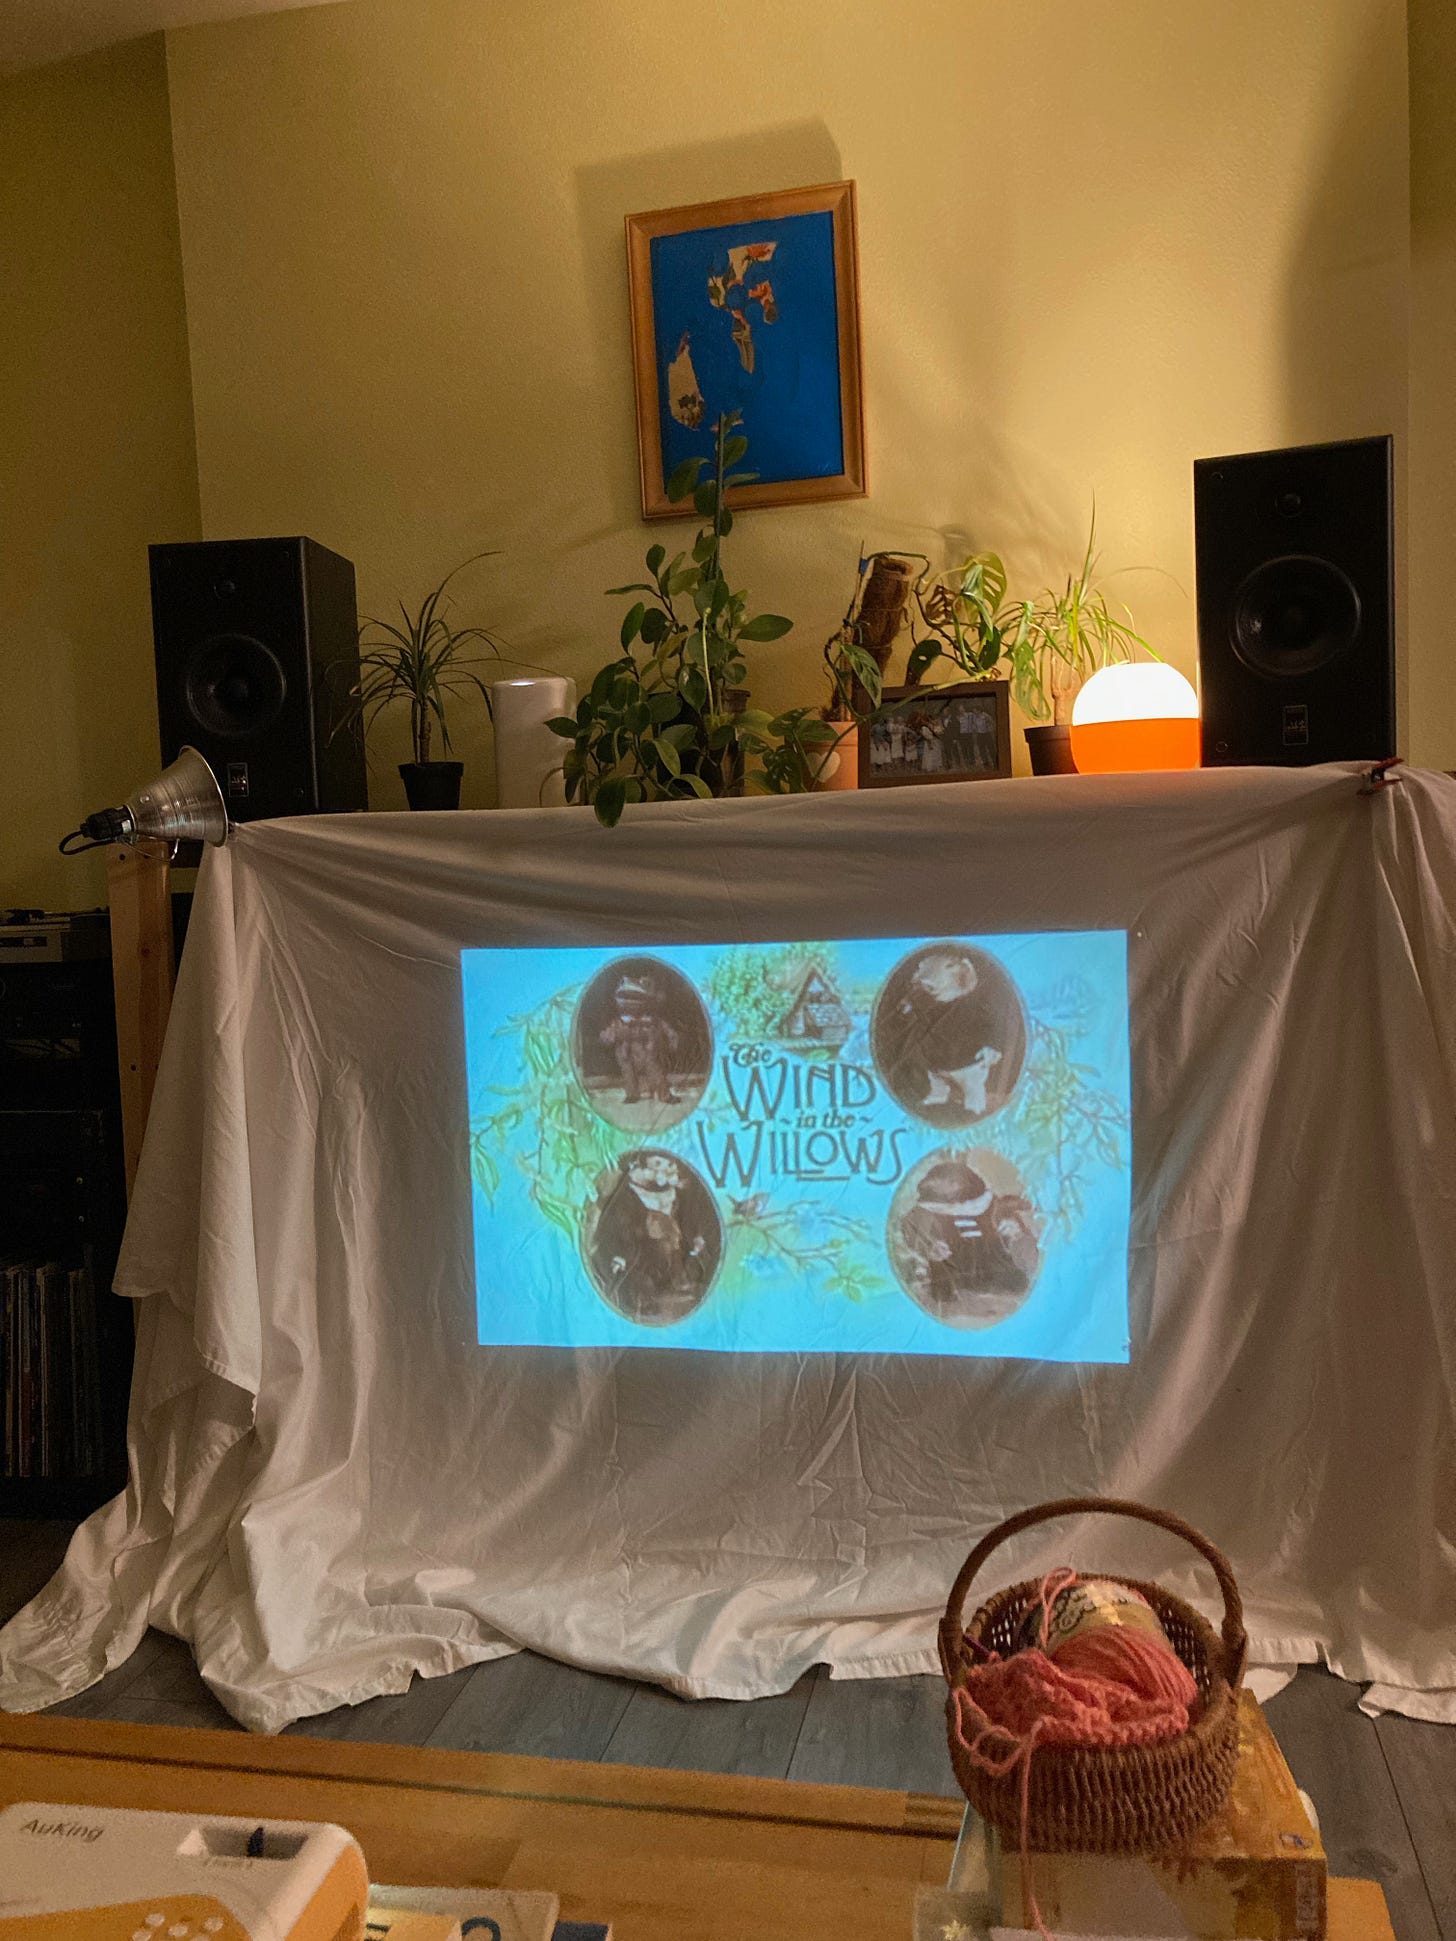 A projector displays "Wind and the Willows" on a sheet in a cozy living room